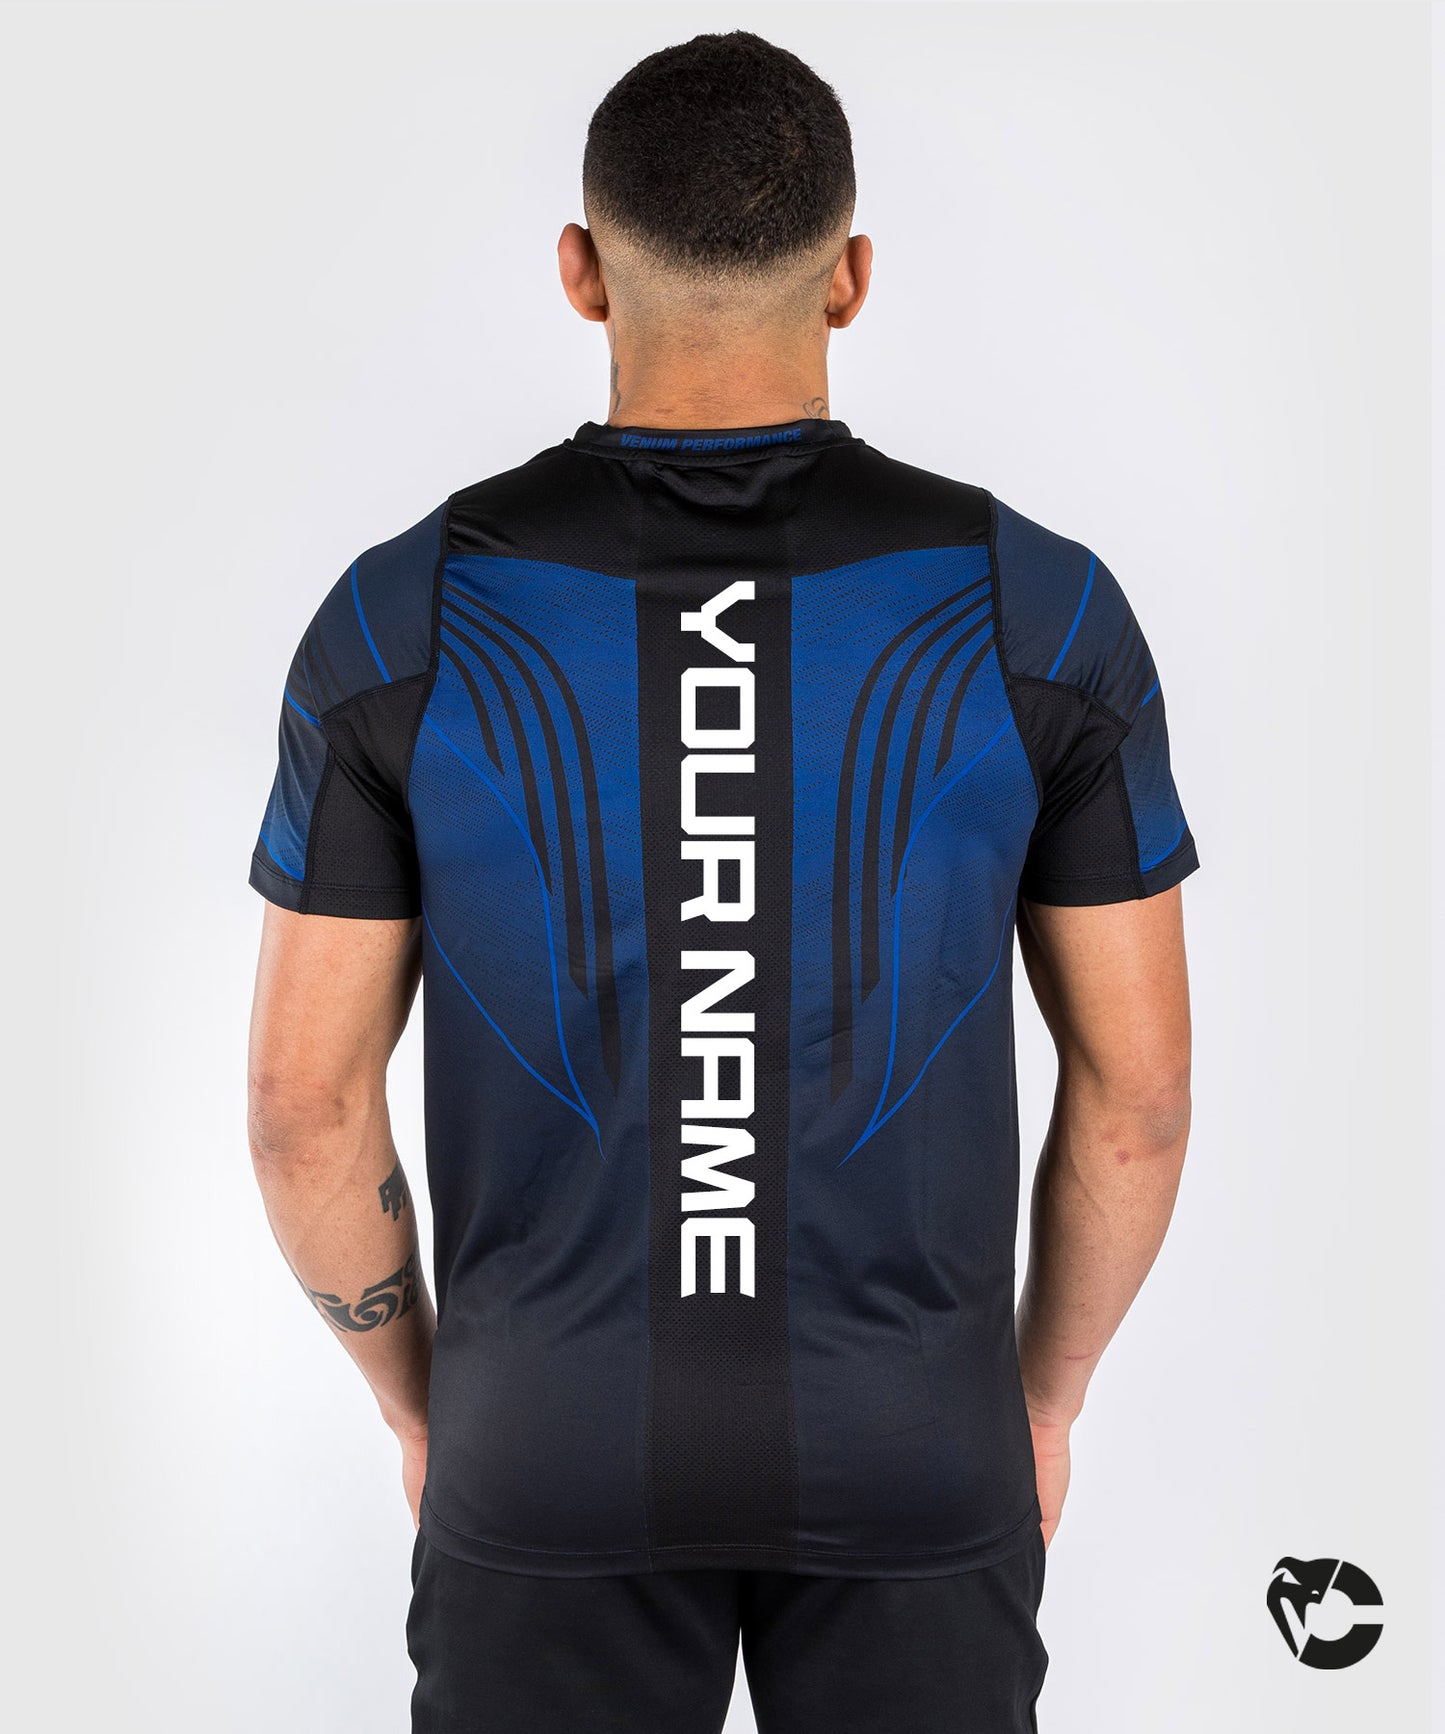 UFC Venum Personalized Authentic Fight Night 2.0 Kit by Venum Men's Walkout Jersey - Midnight Edition